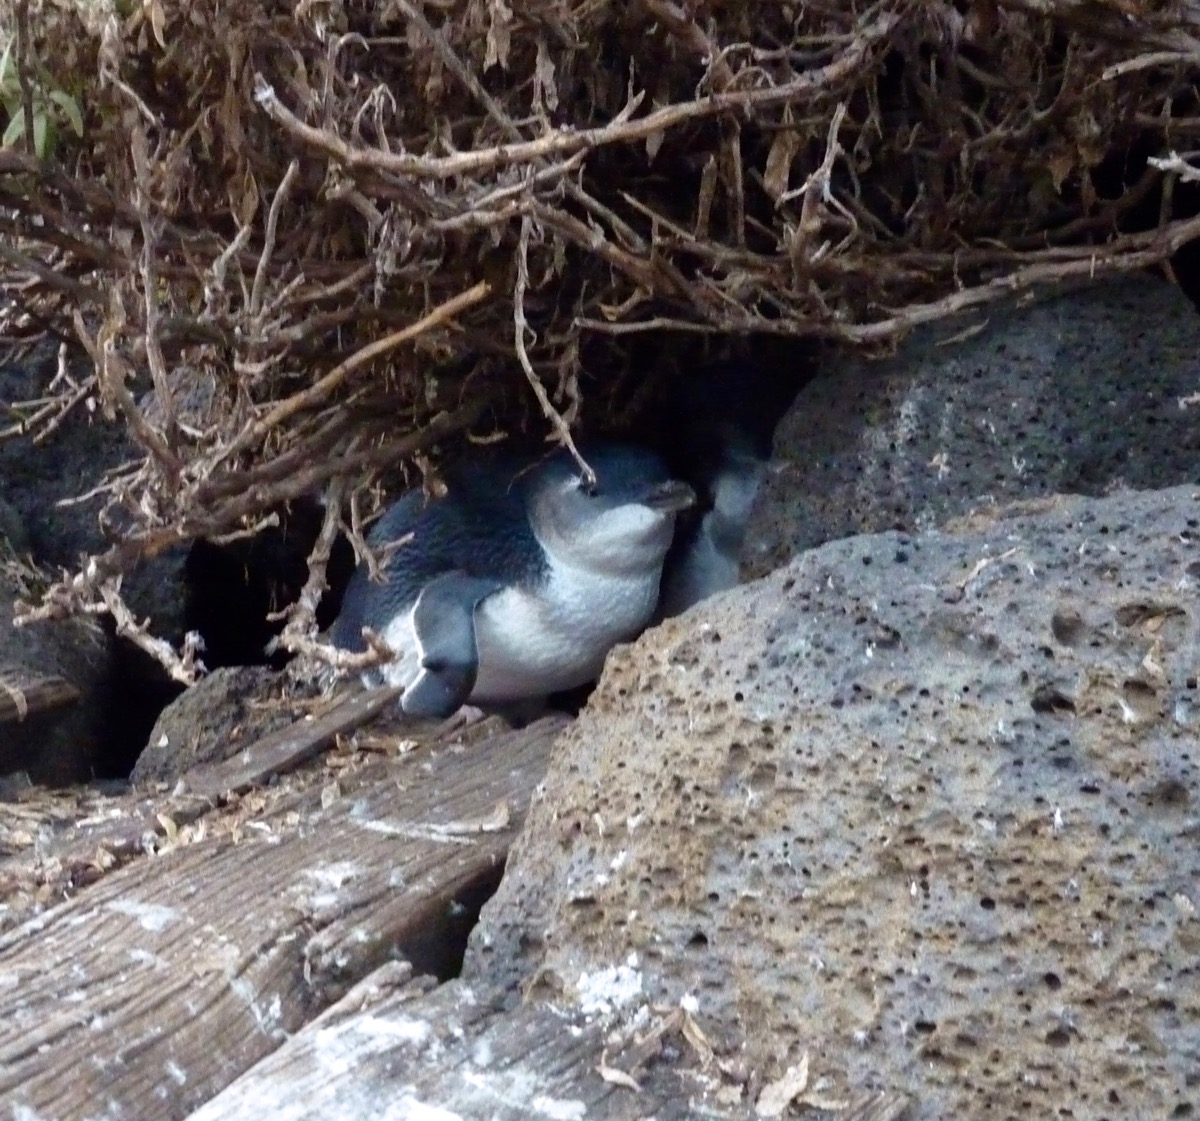 An image of Penguin at St Kilda